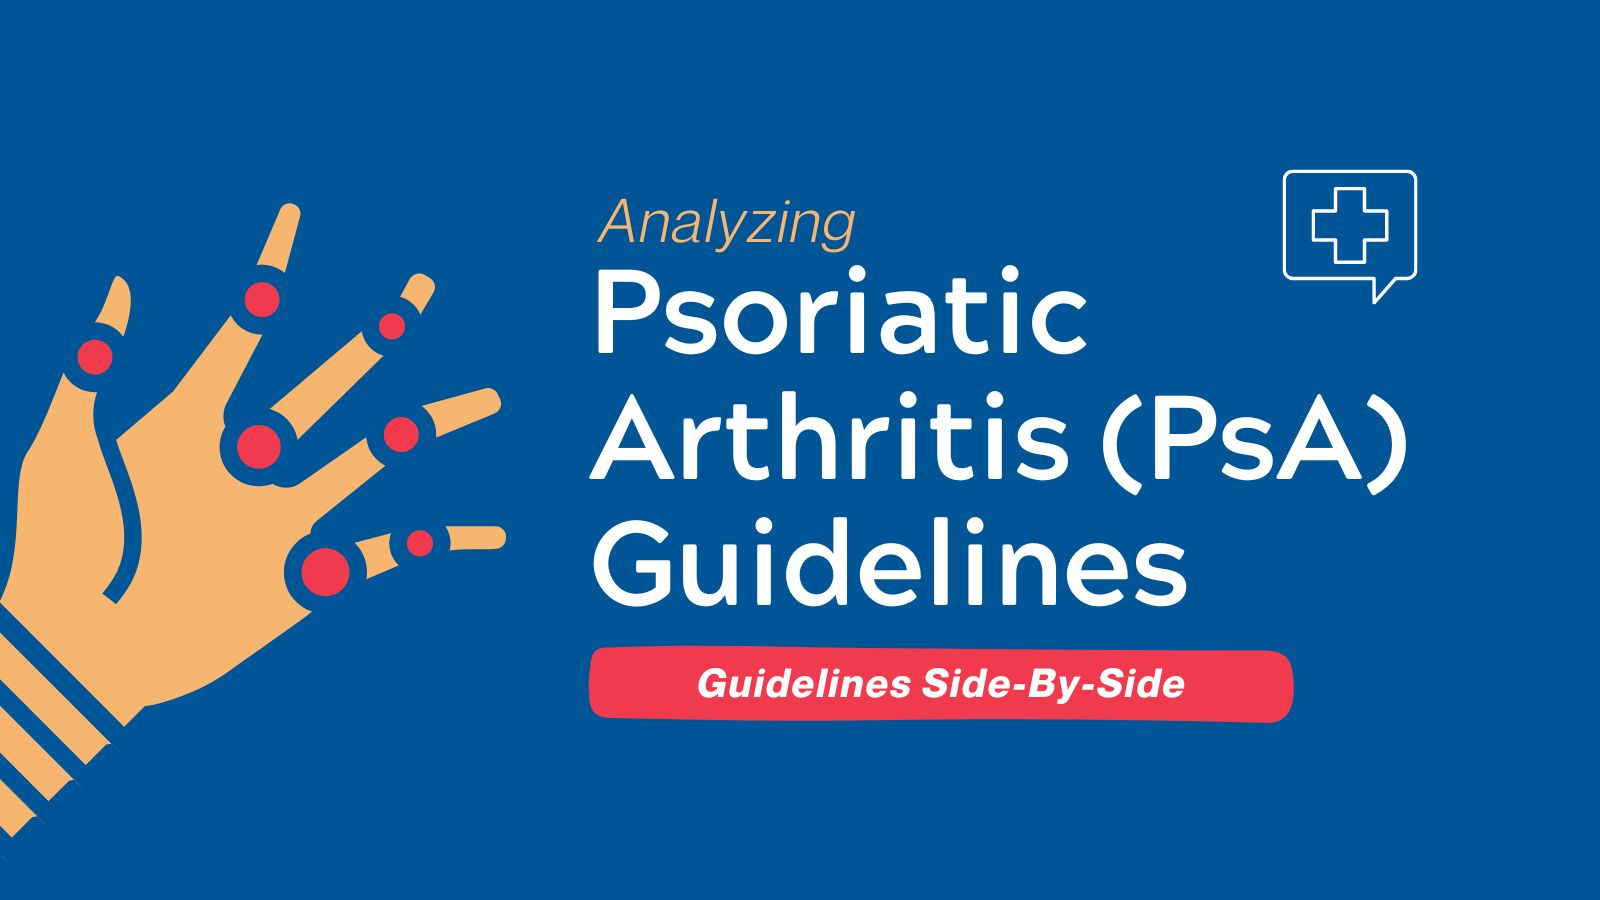 Guidelines Side-By-Side Psoriatic Arthritis